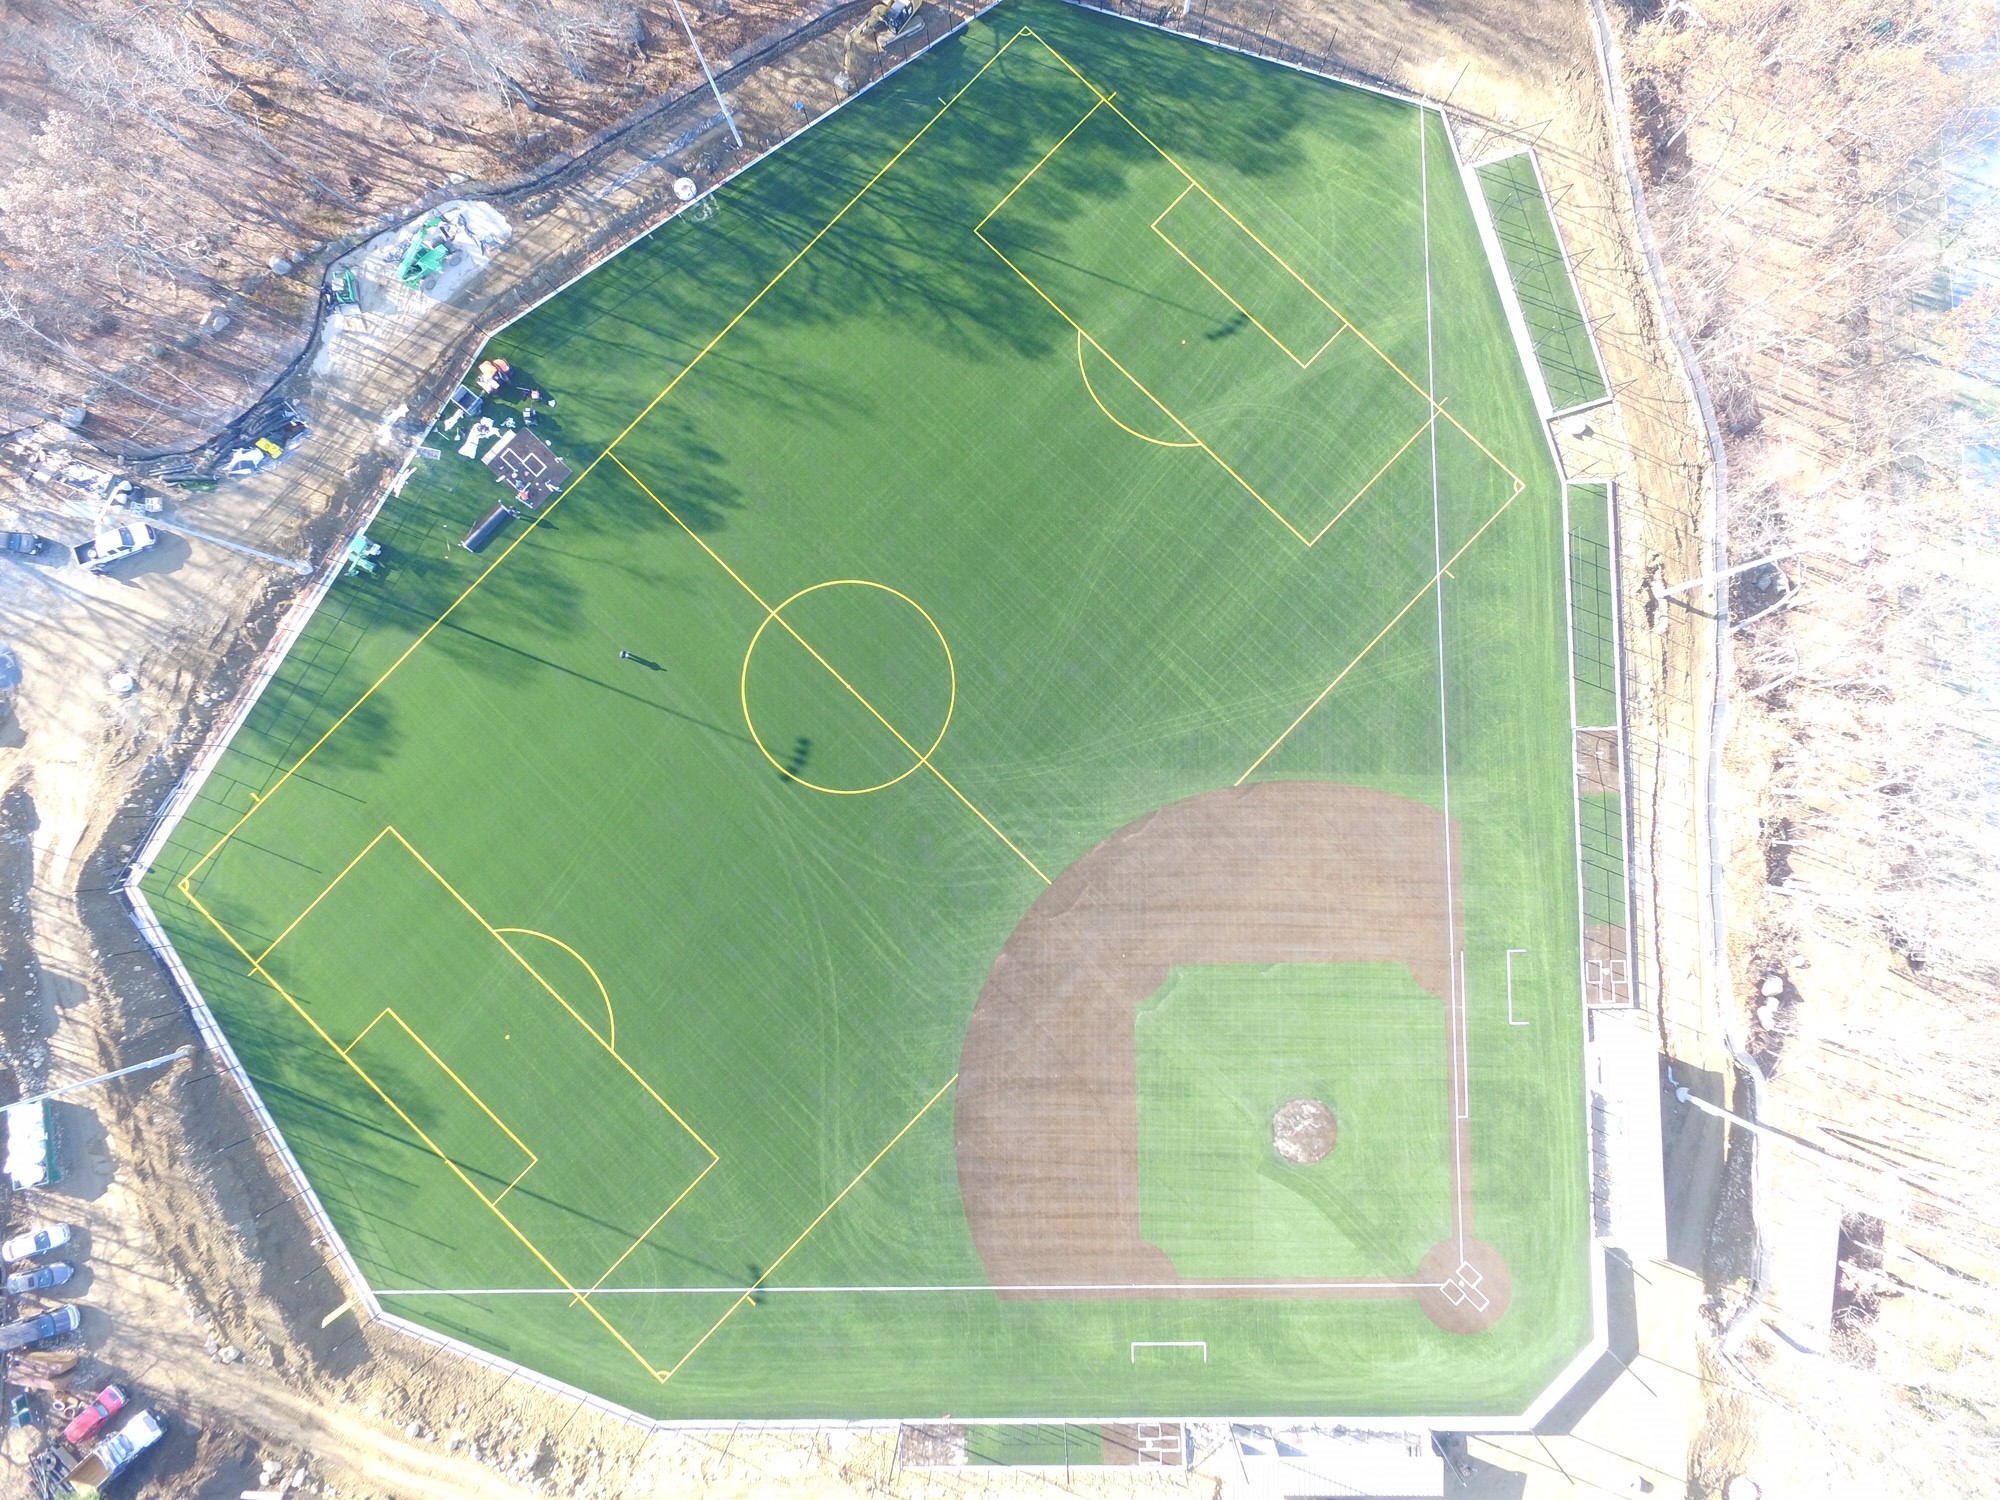 Marlborough Panthers New Home Field - Buy, Install And -2082